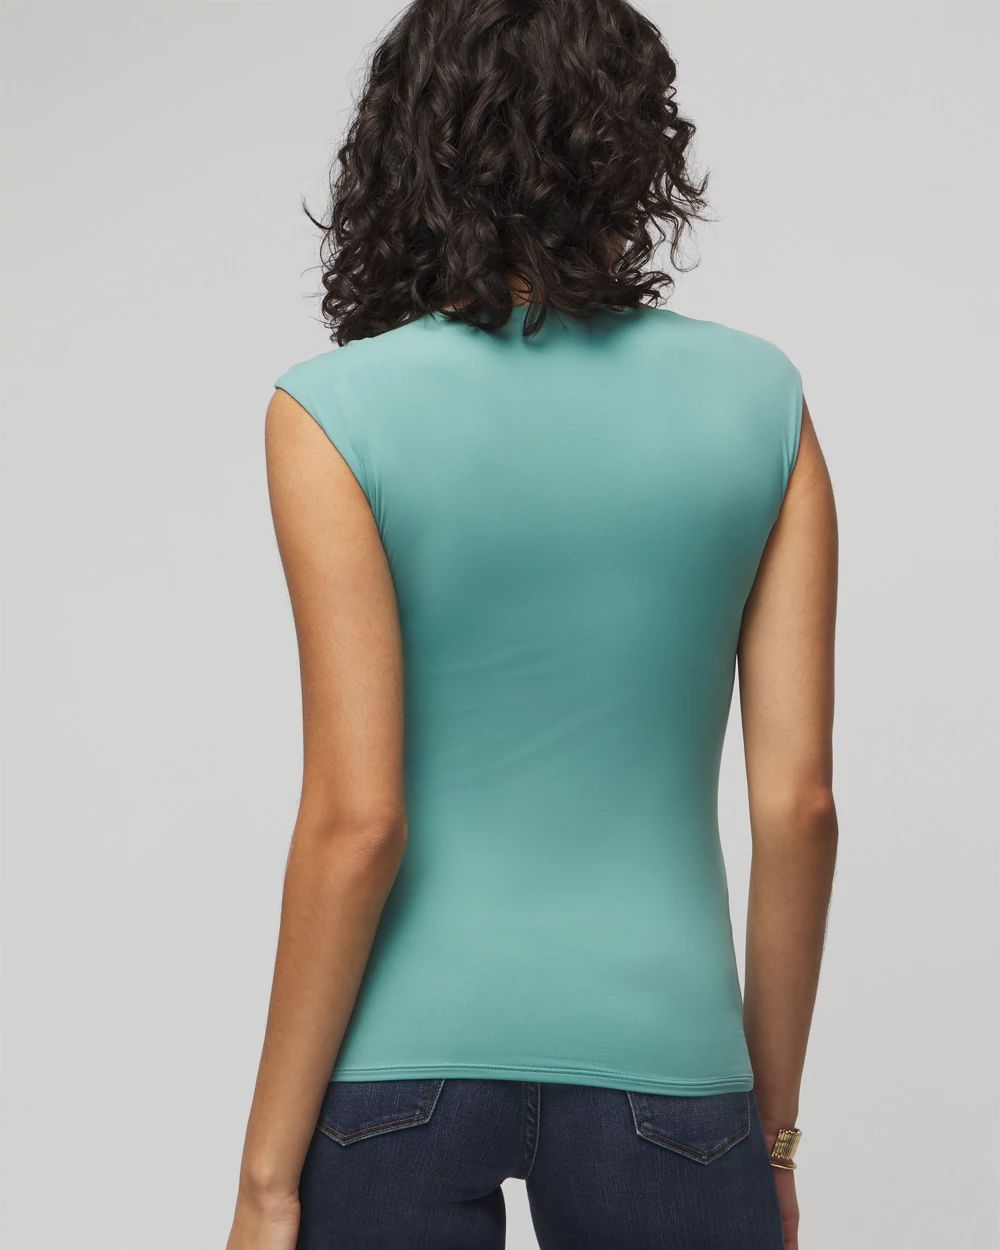 WHBM® FORME Square-Neck Cap-Sleeve Top click to view larger image.